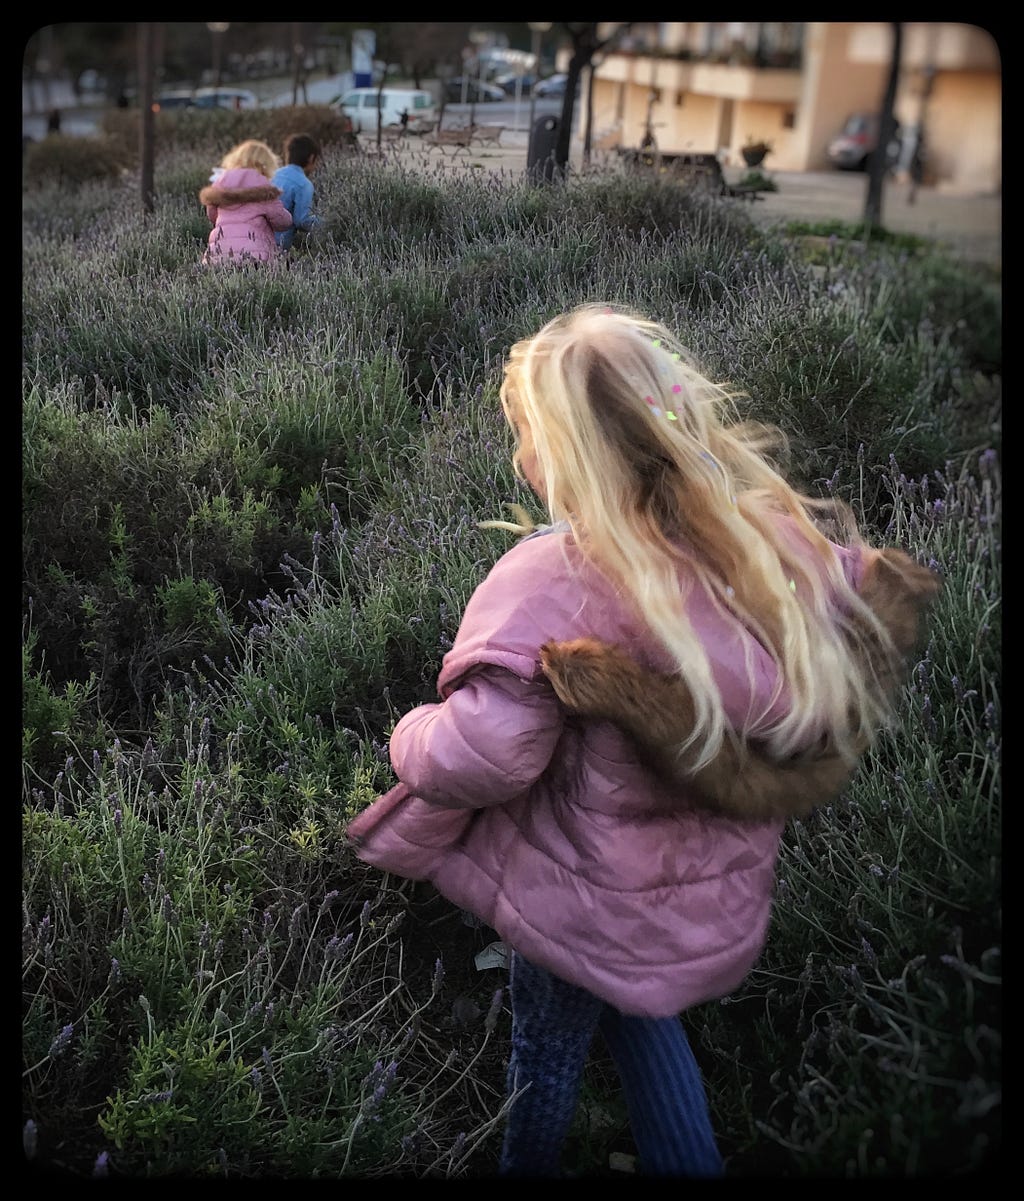 A young girl chases another girl who looks like her and is dressed the same, through some lavender.